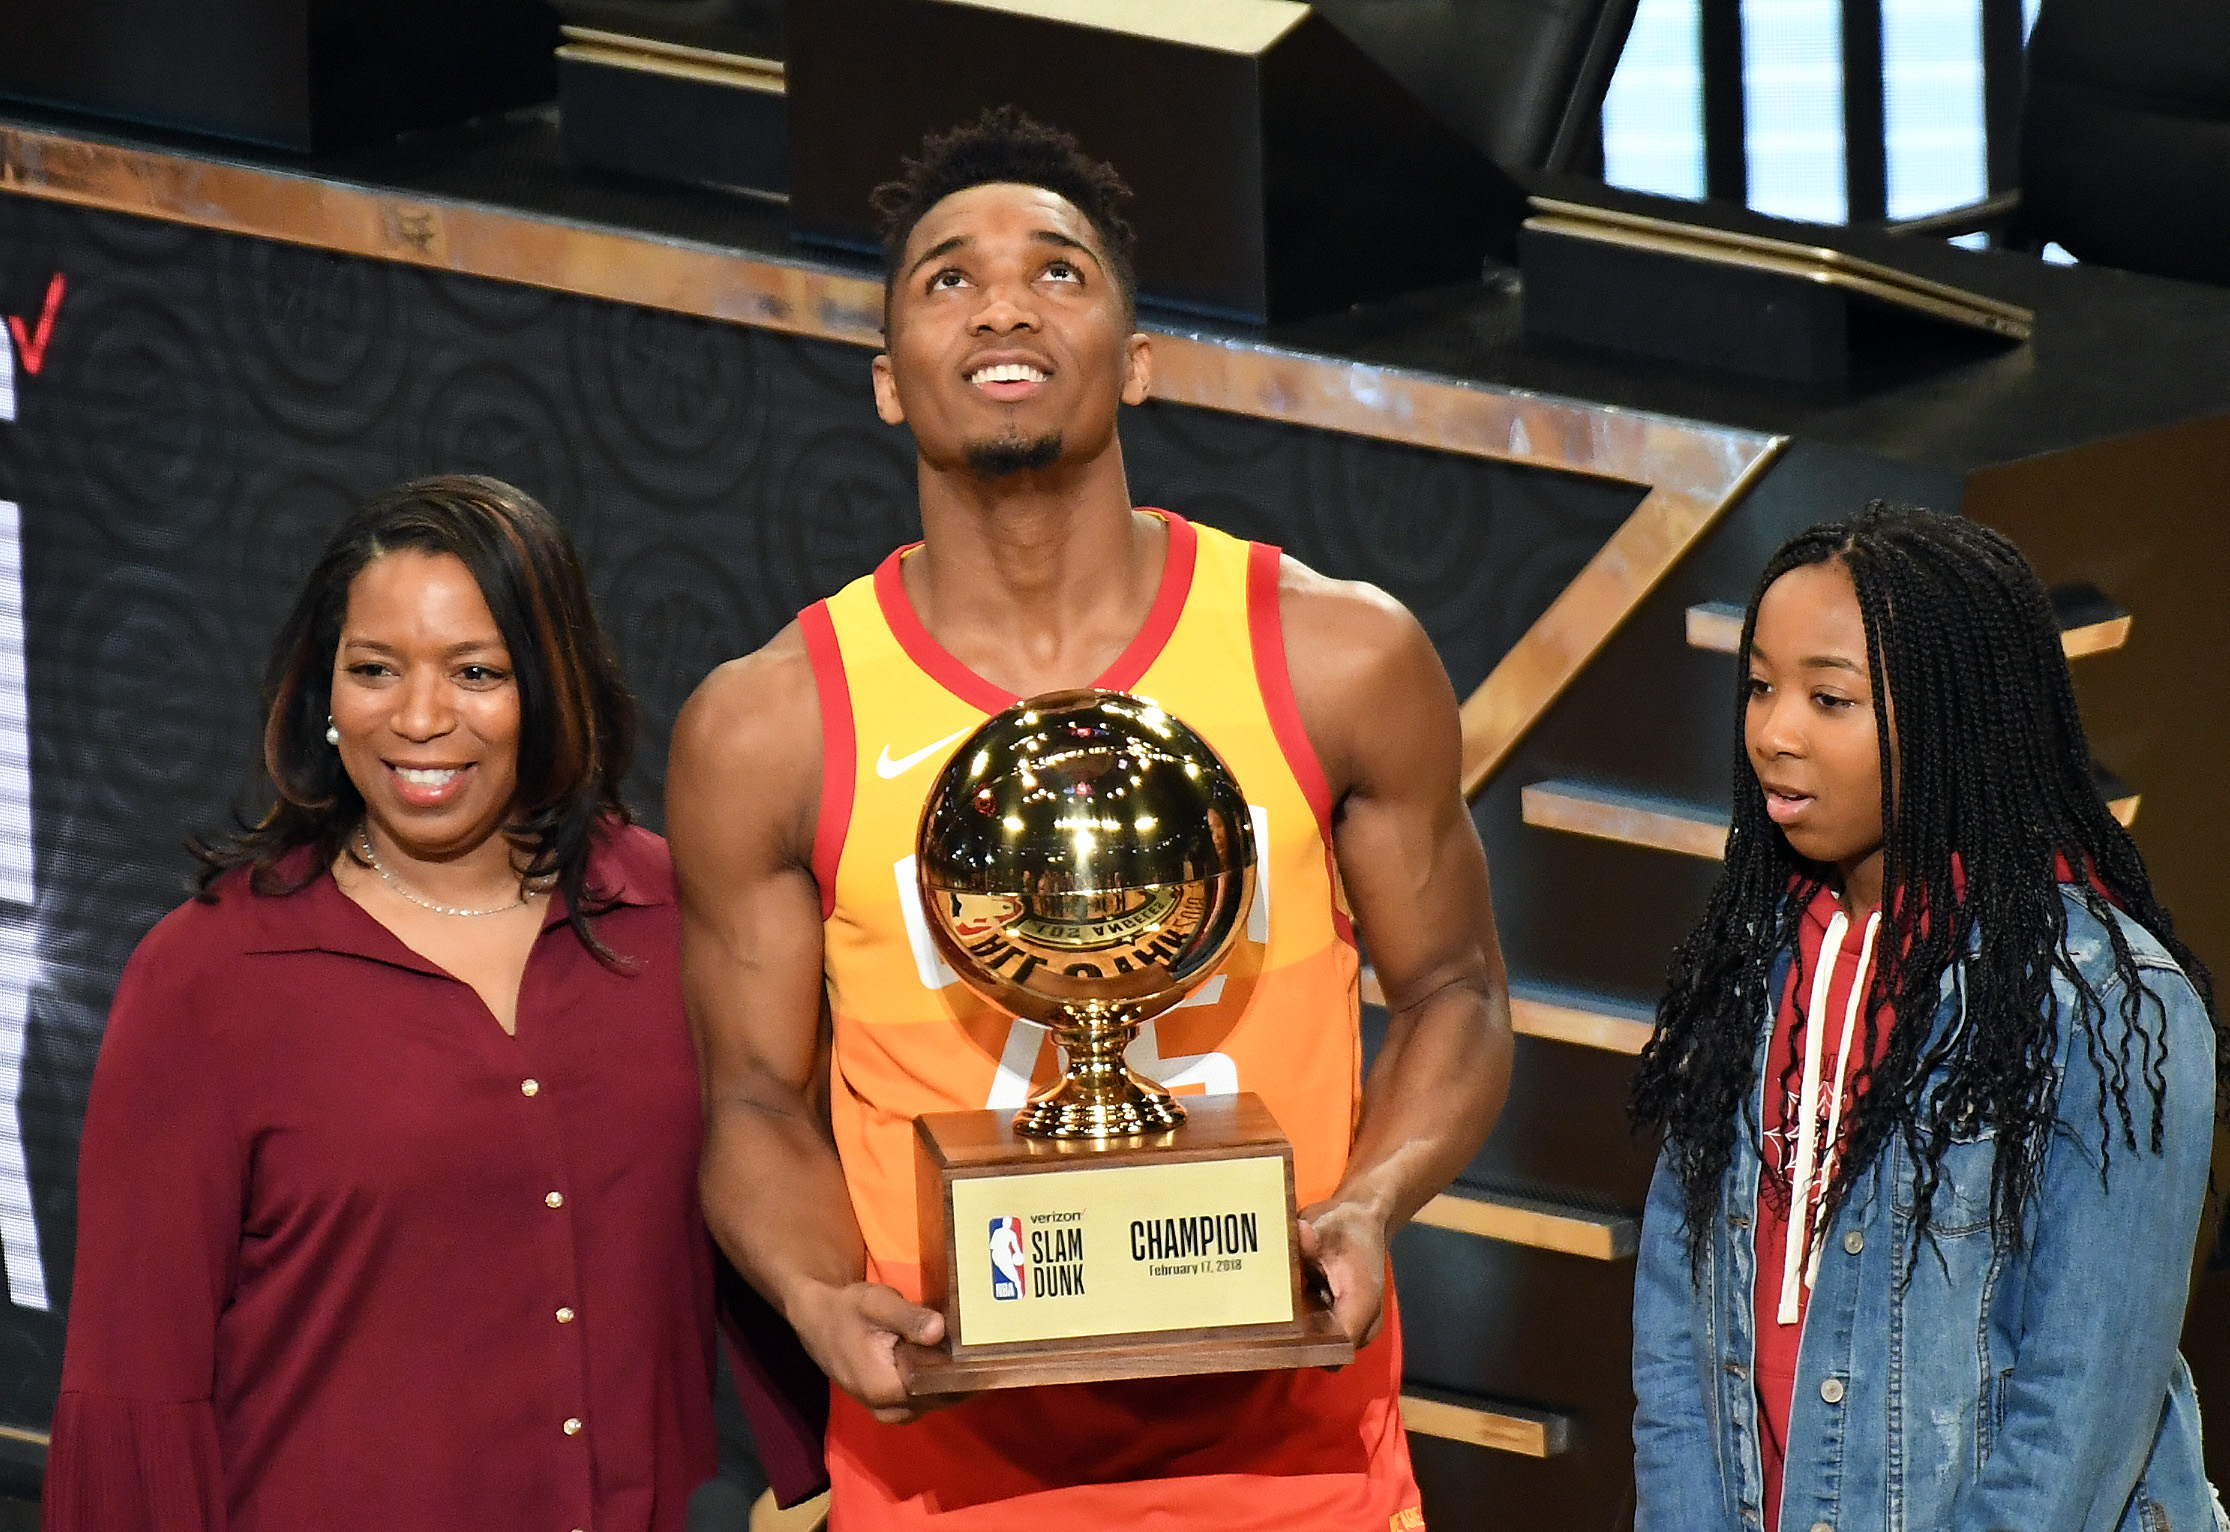 8 amazing photos from the 2018 Slam Dunk Contest